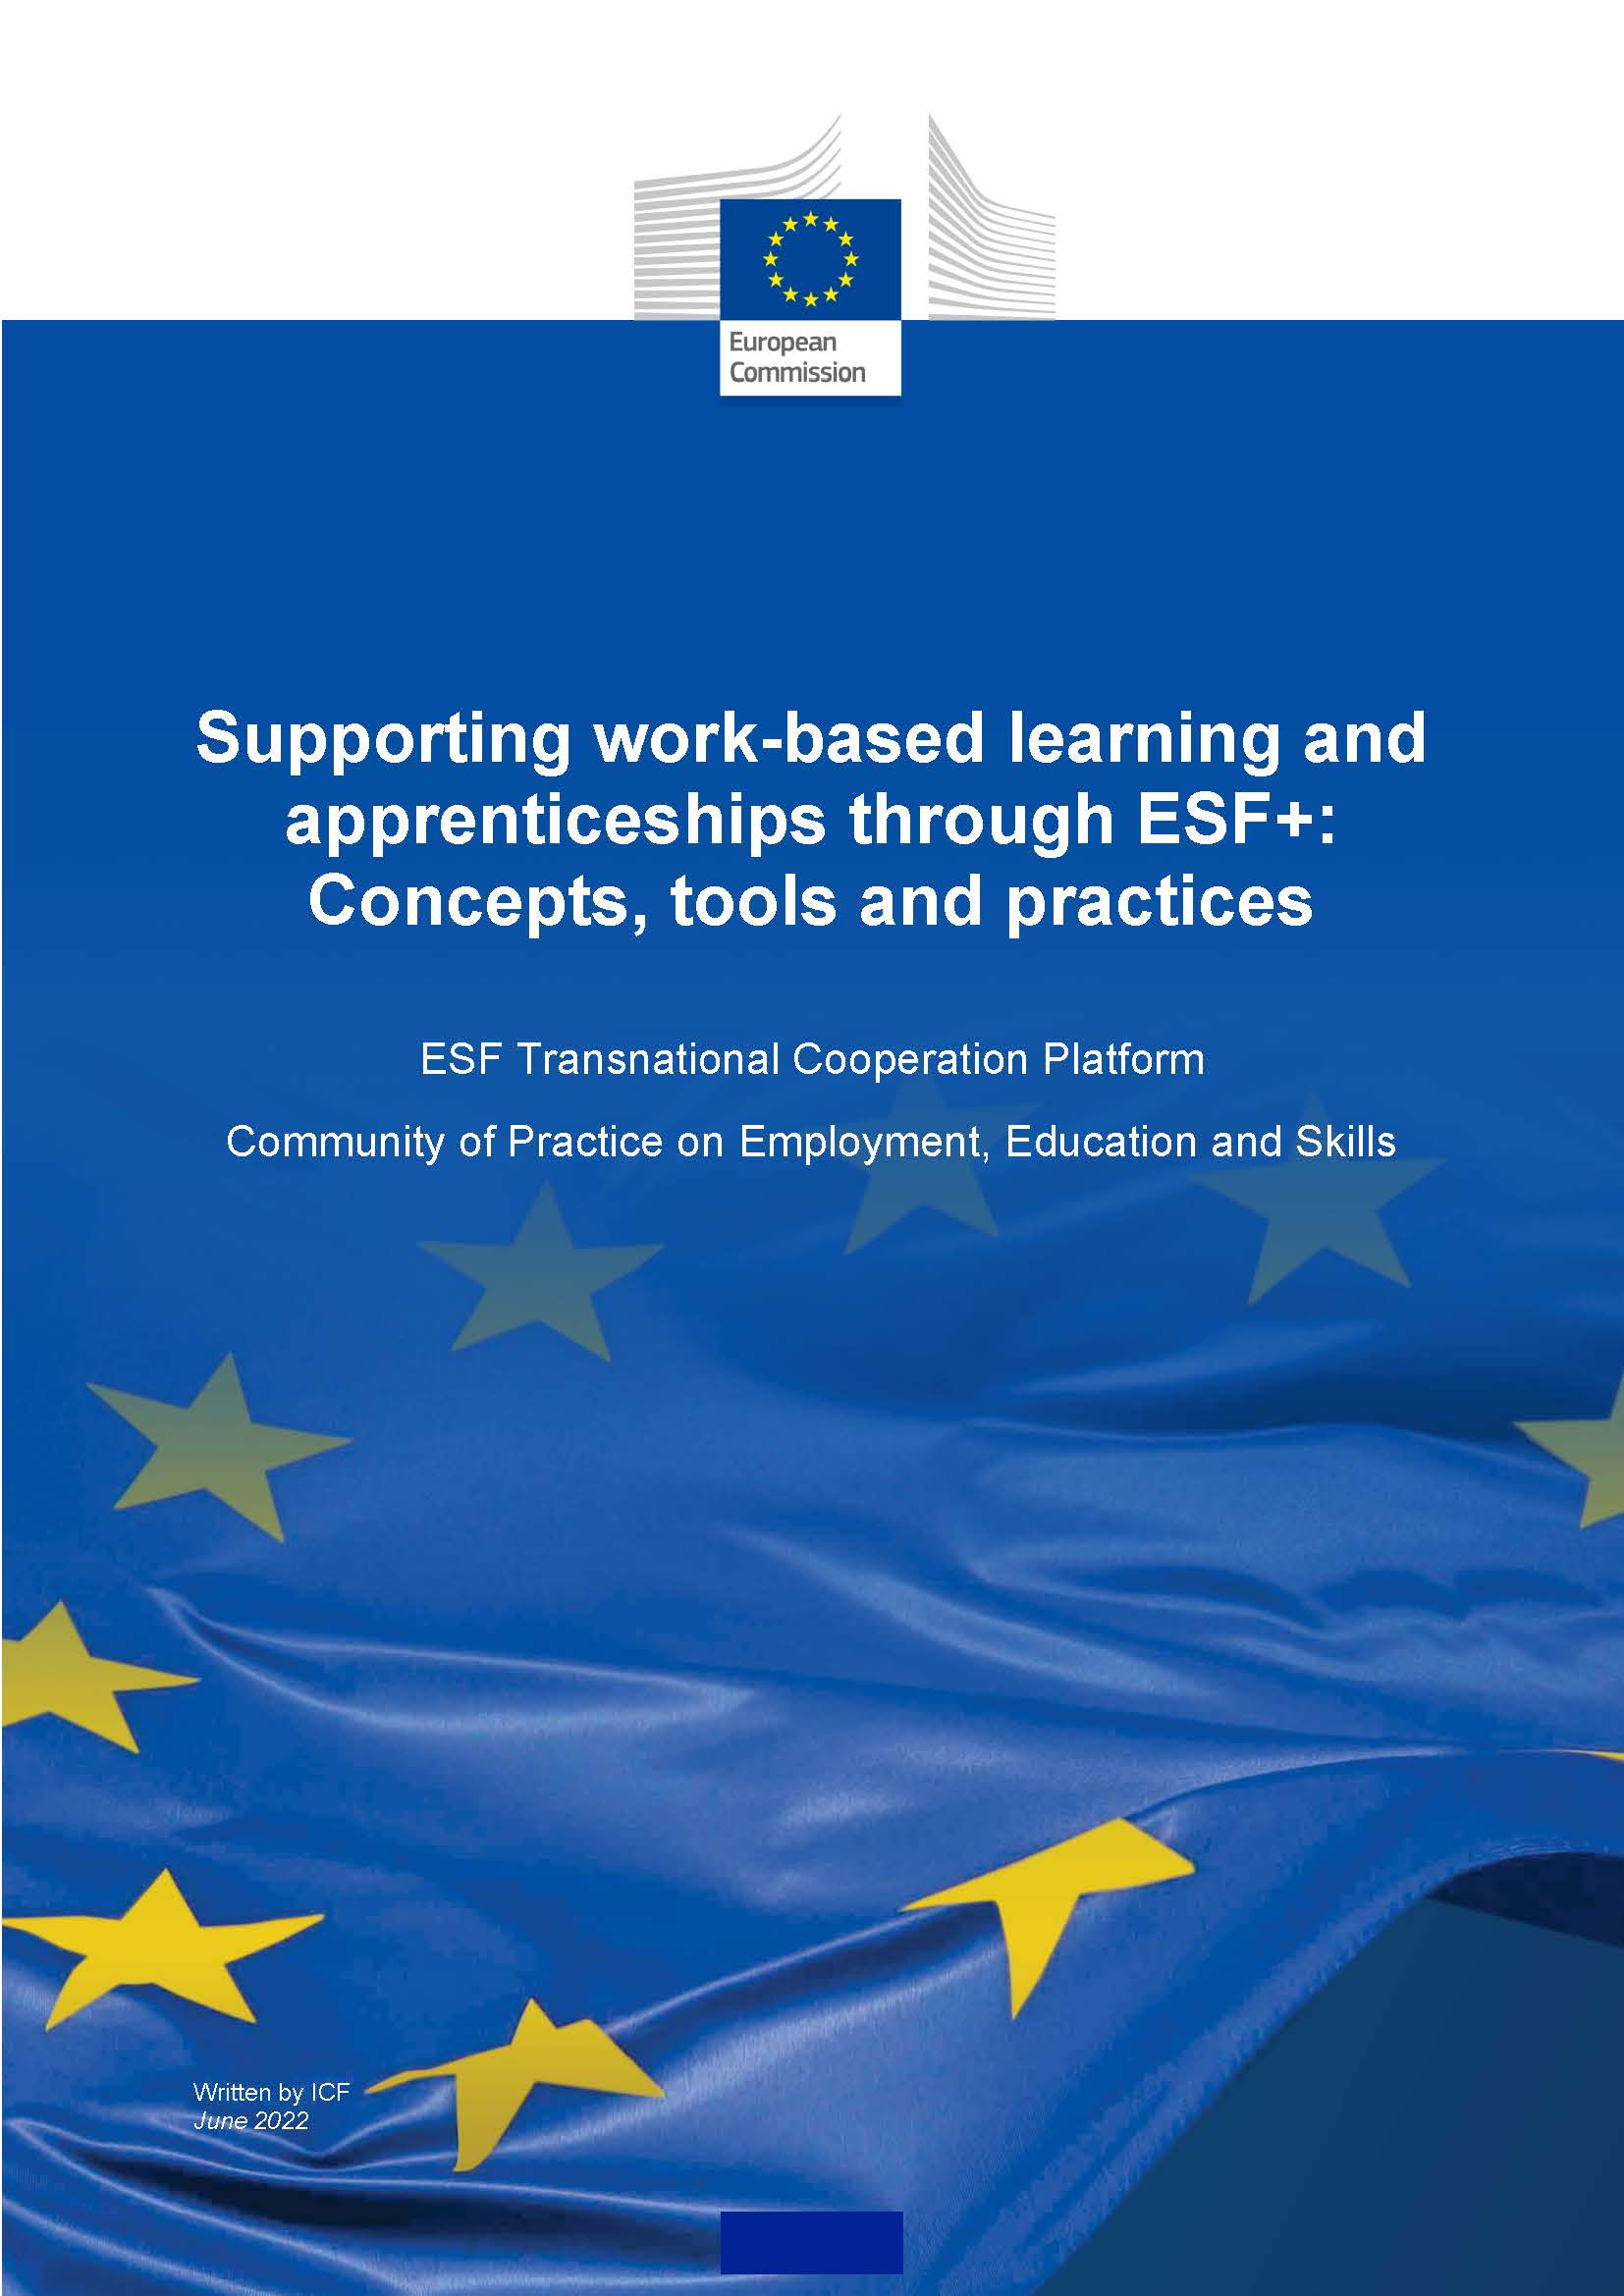 Supporting work-based learning and apprenticeships through ESF+: Concepts, tools and practices